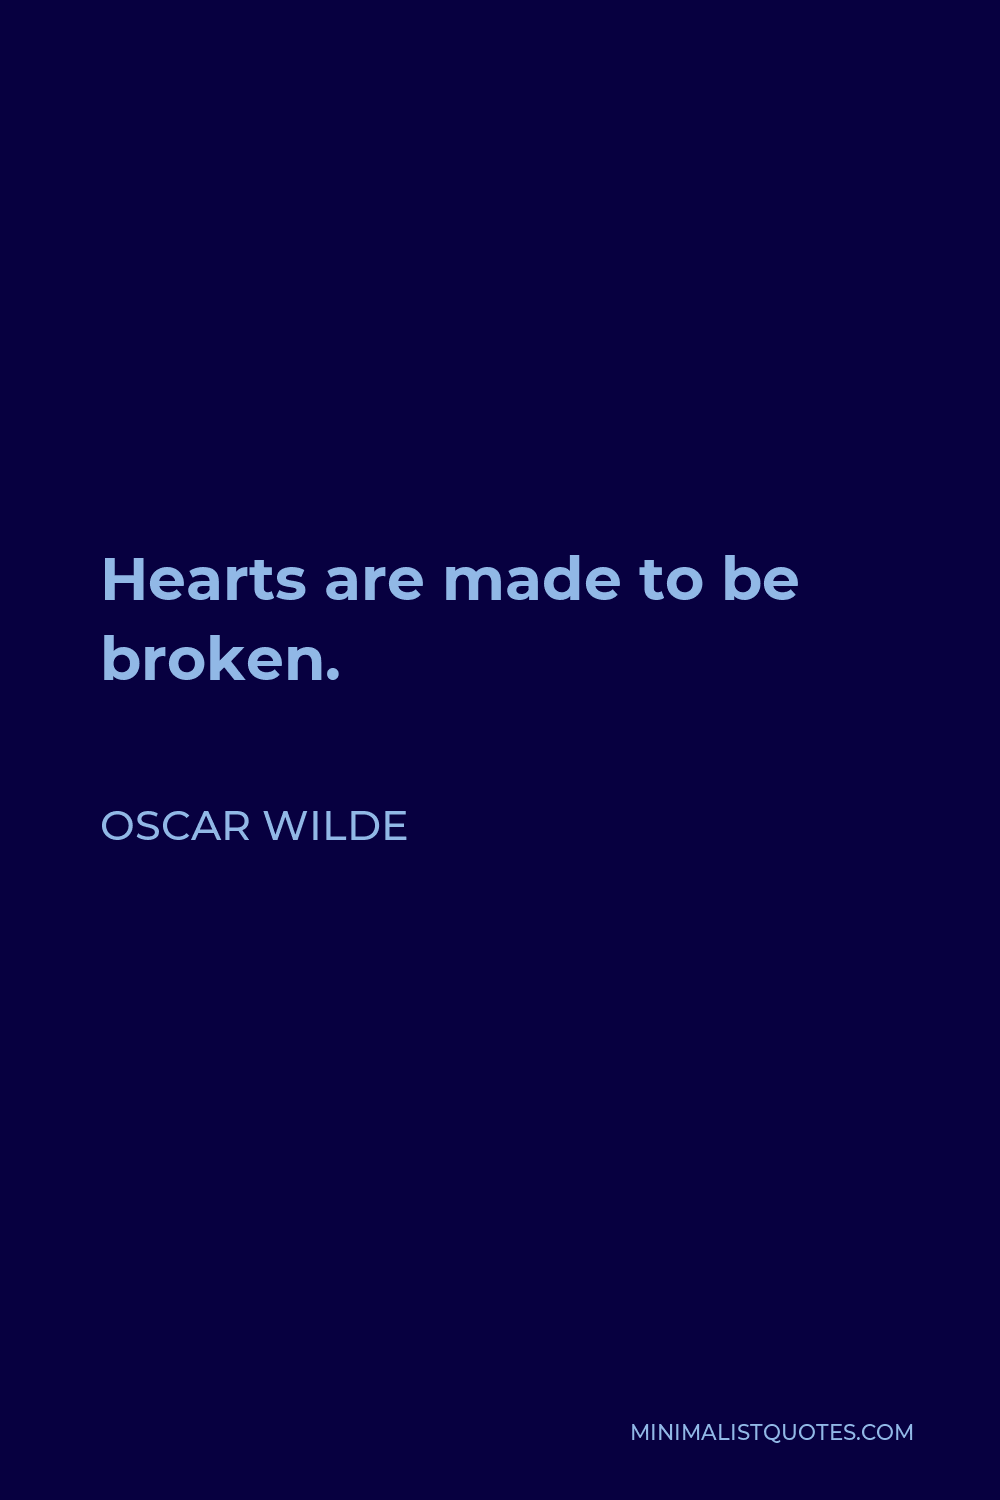 Oscar Wilde Quote - Hearts are made to be broken.